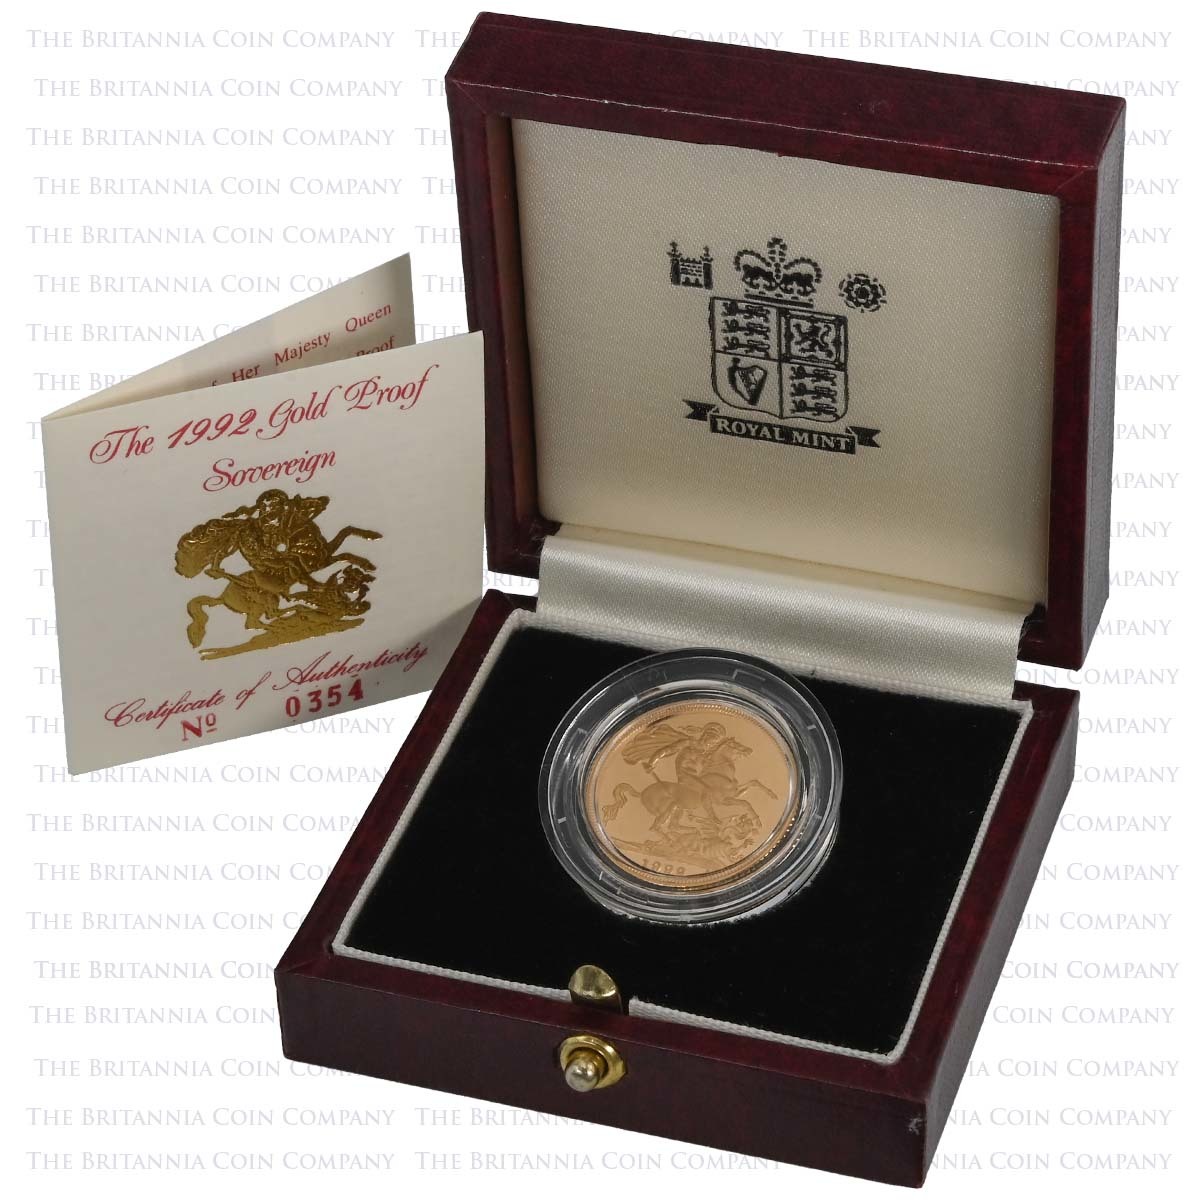 1992 Elizabeth II Gold Proof Sovereign Boxed